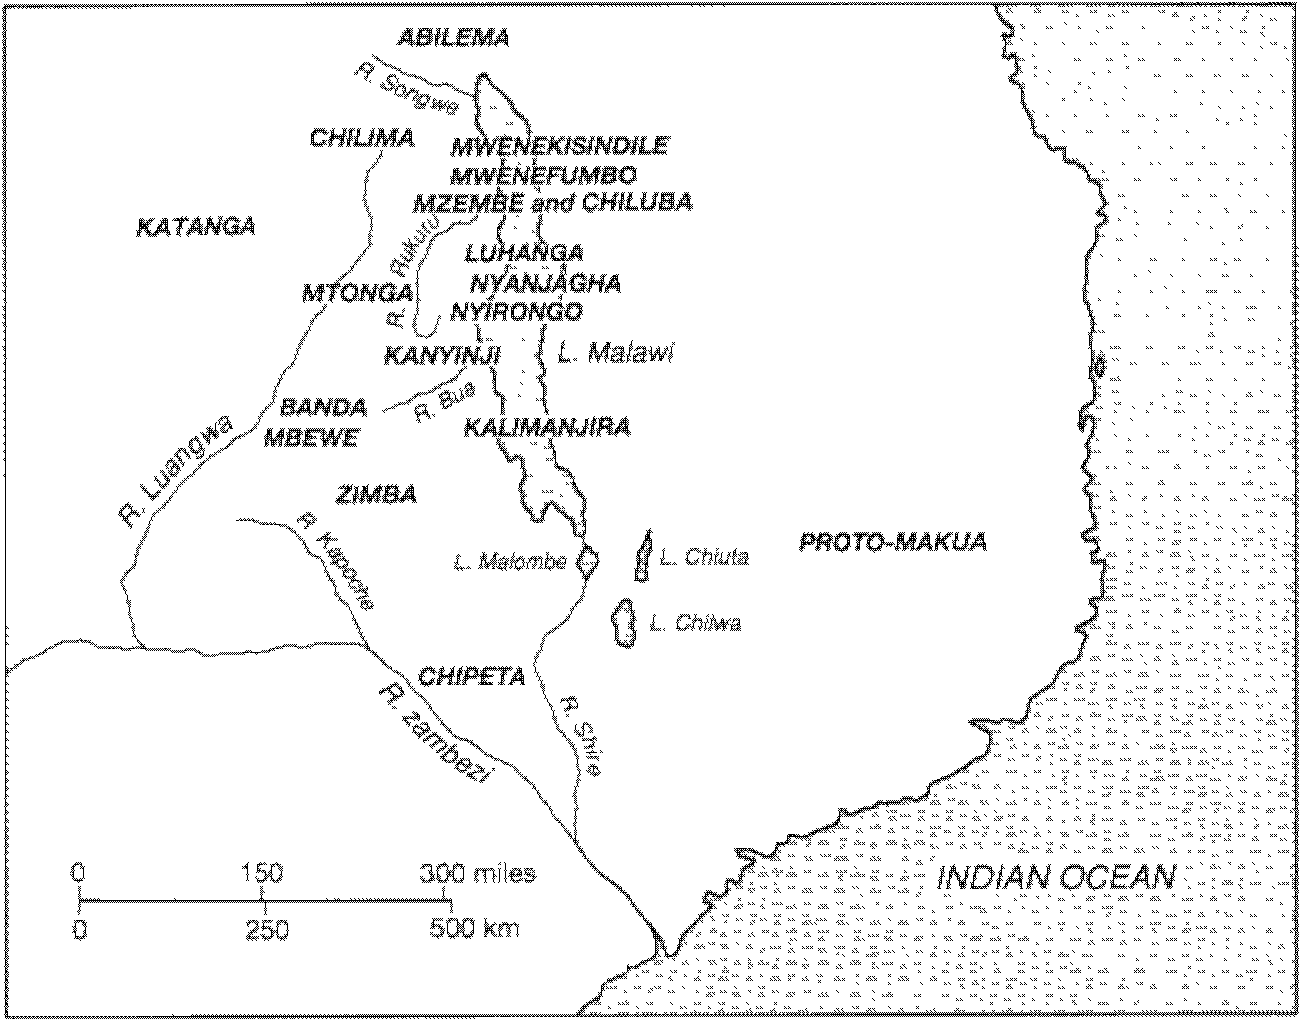 Pre-dynastic groups in Northern Zimbabwe (after K. M. Phiri and O. J. M. Kalinga).png